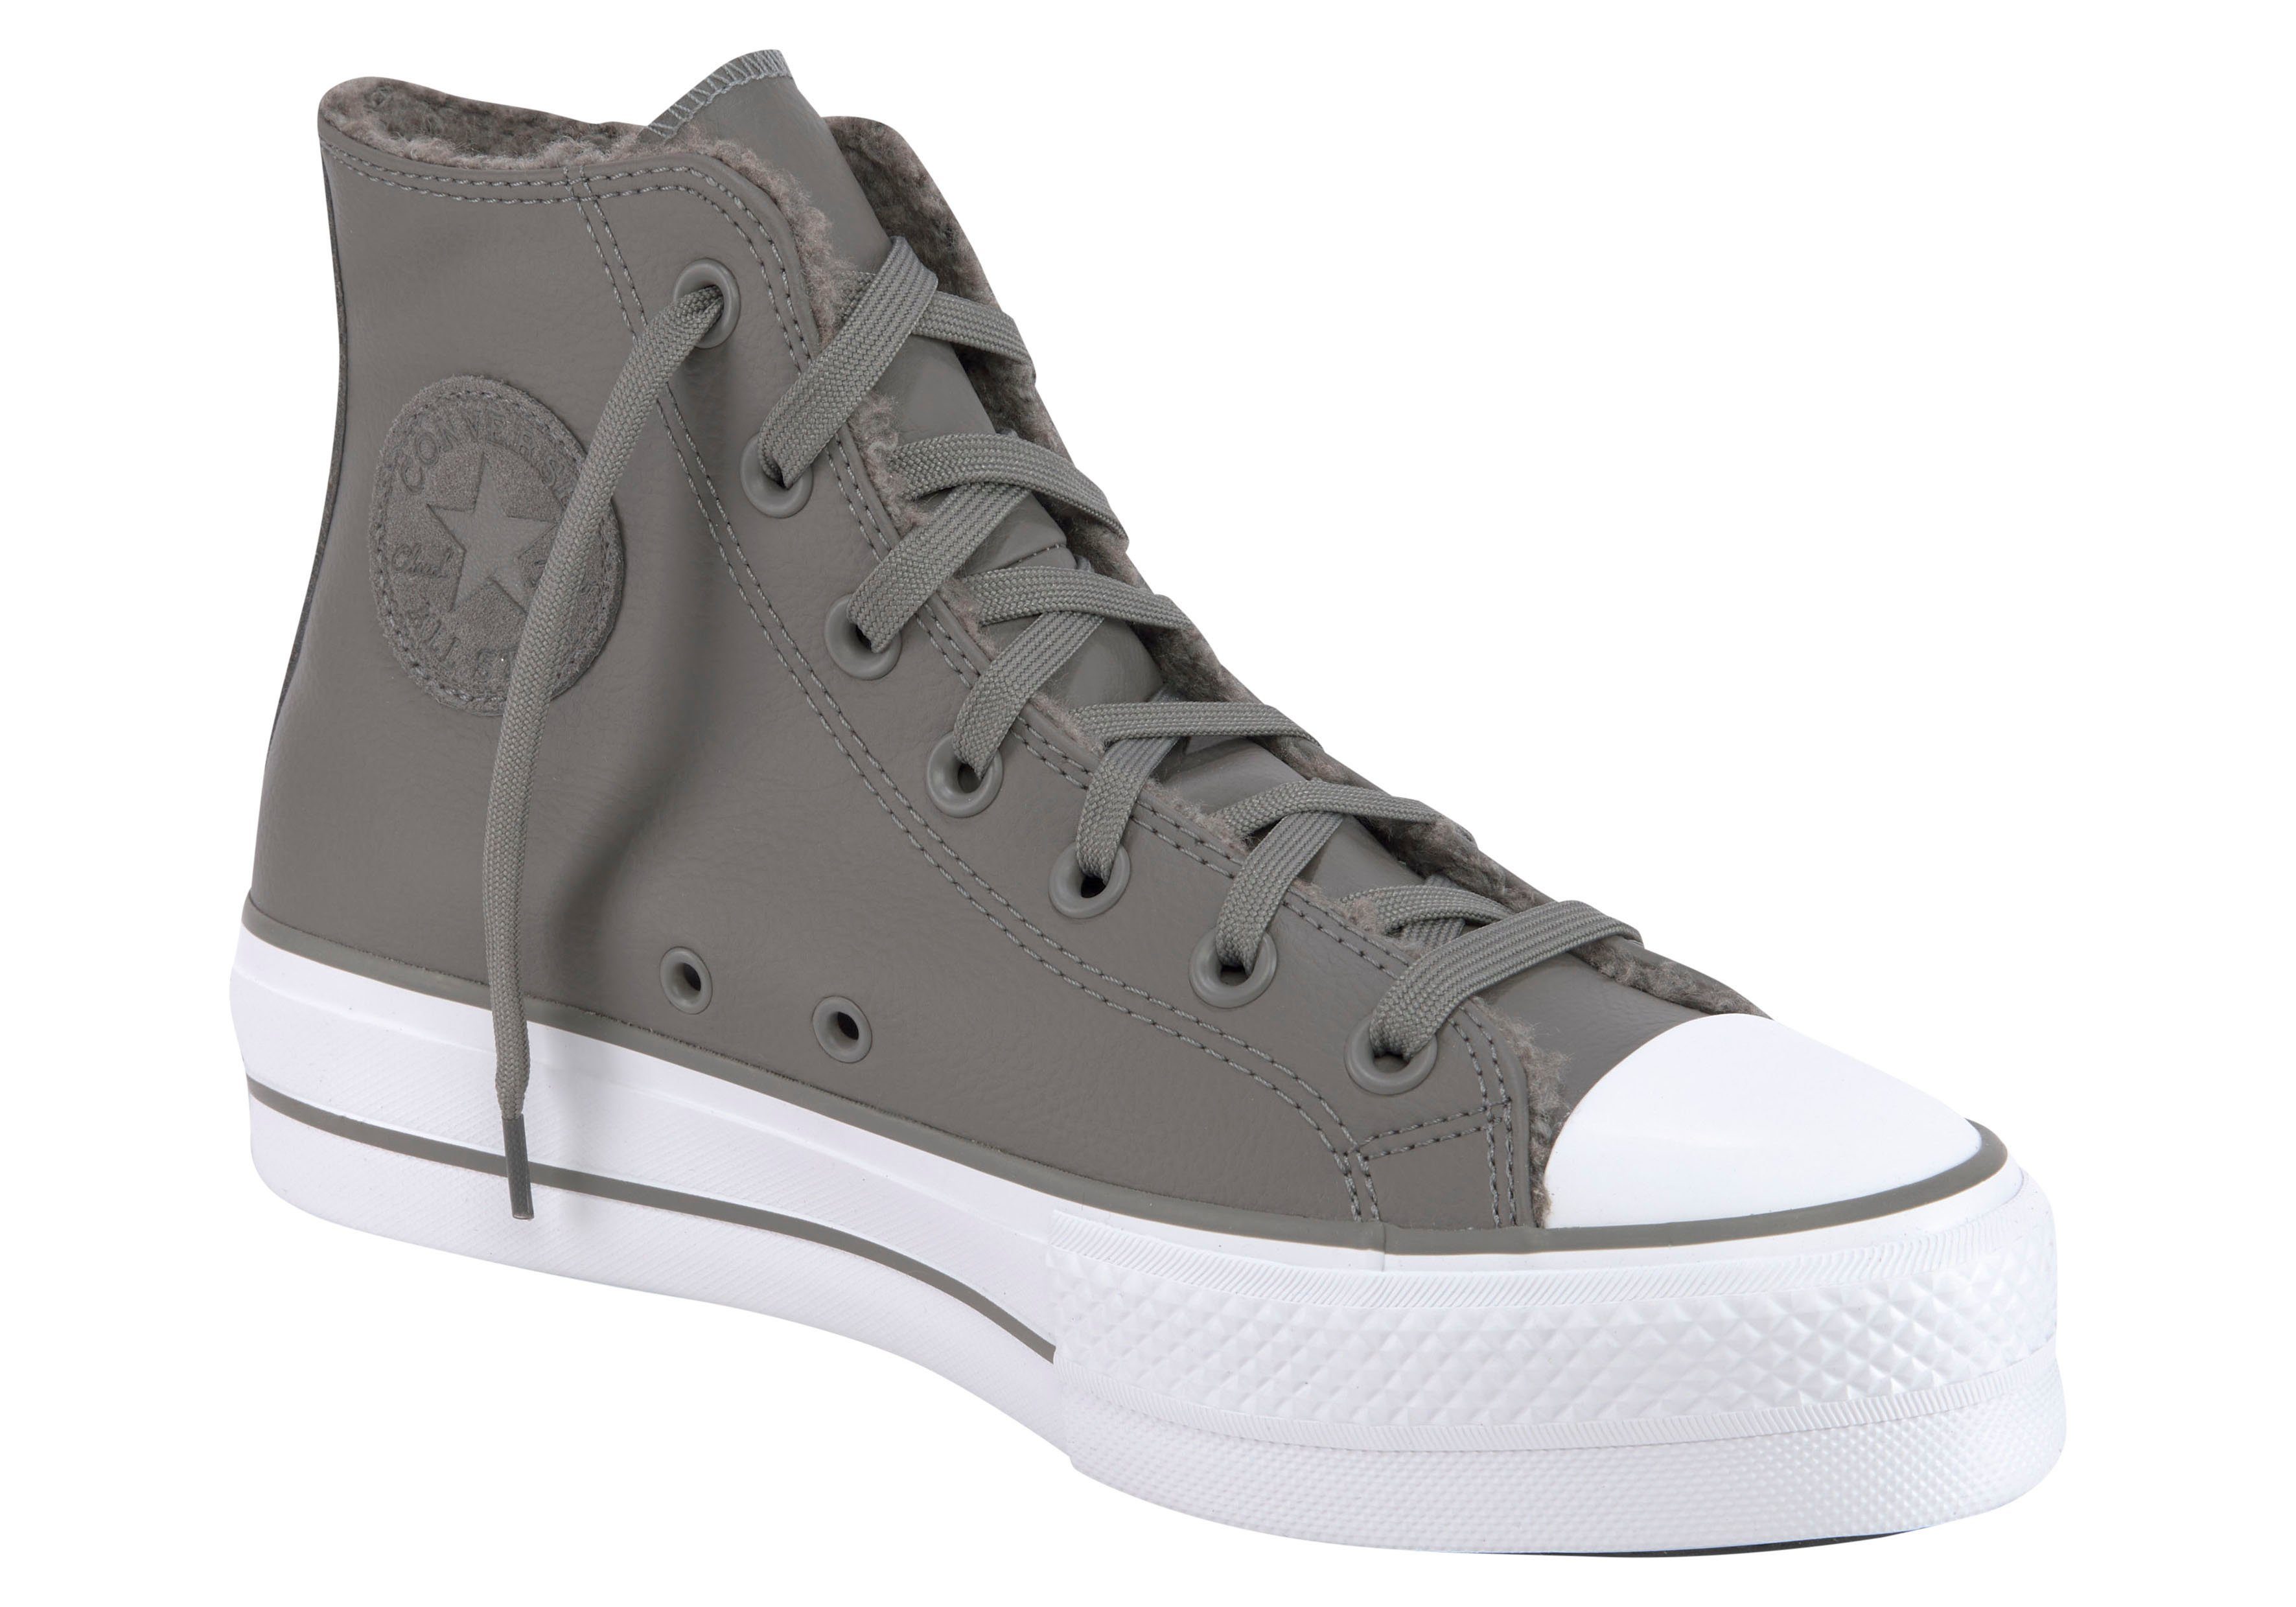 Converse Sneakers CHUCK TAYLOR ALL STAR LIFT PLATFORM Warme voering